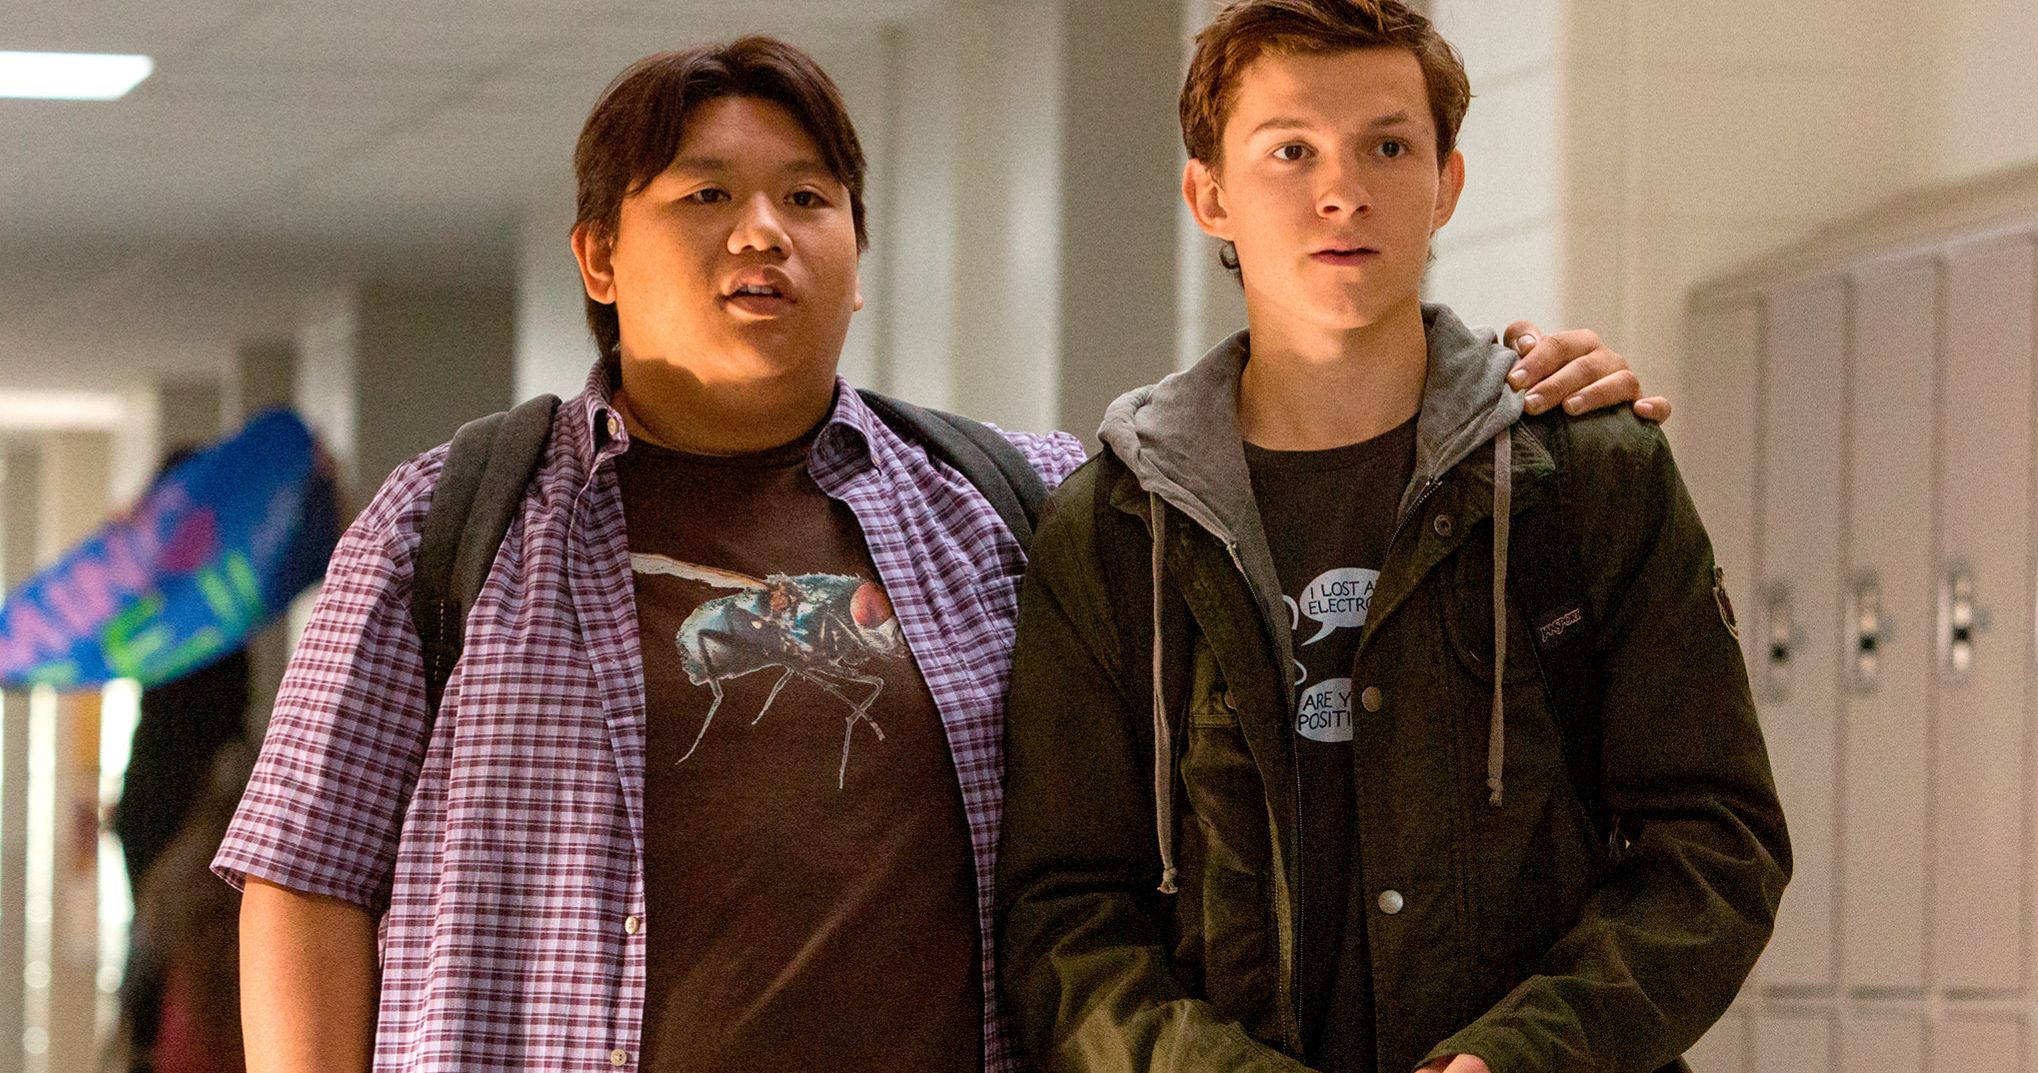 Does Spider-Man: Far from Home Confirm This Avengers: Endgame Fan Theory?